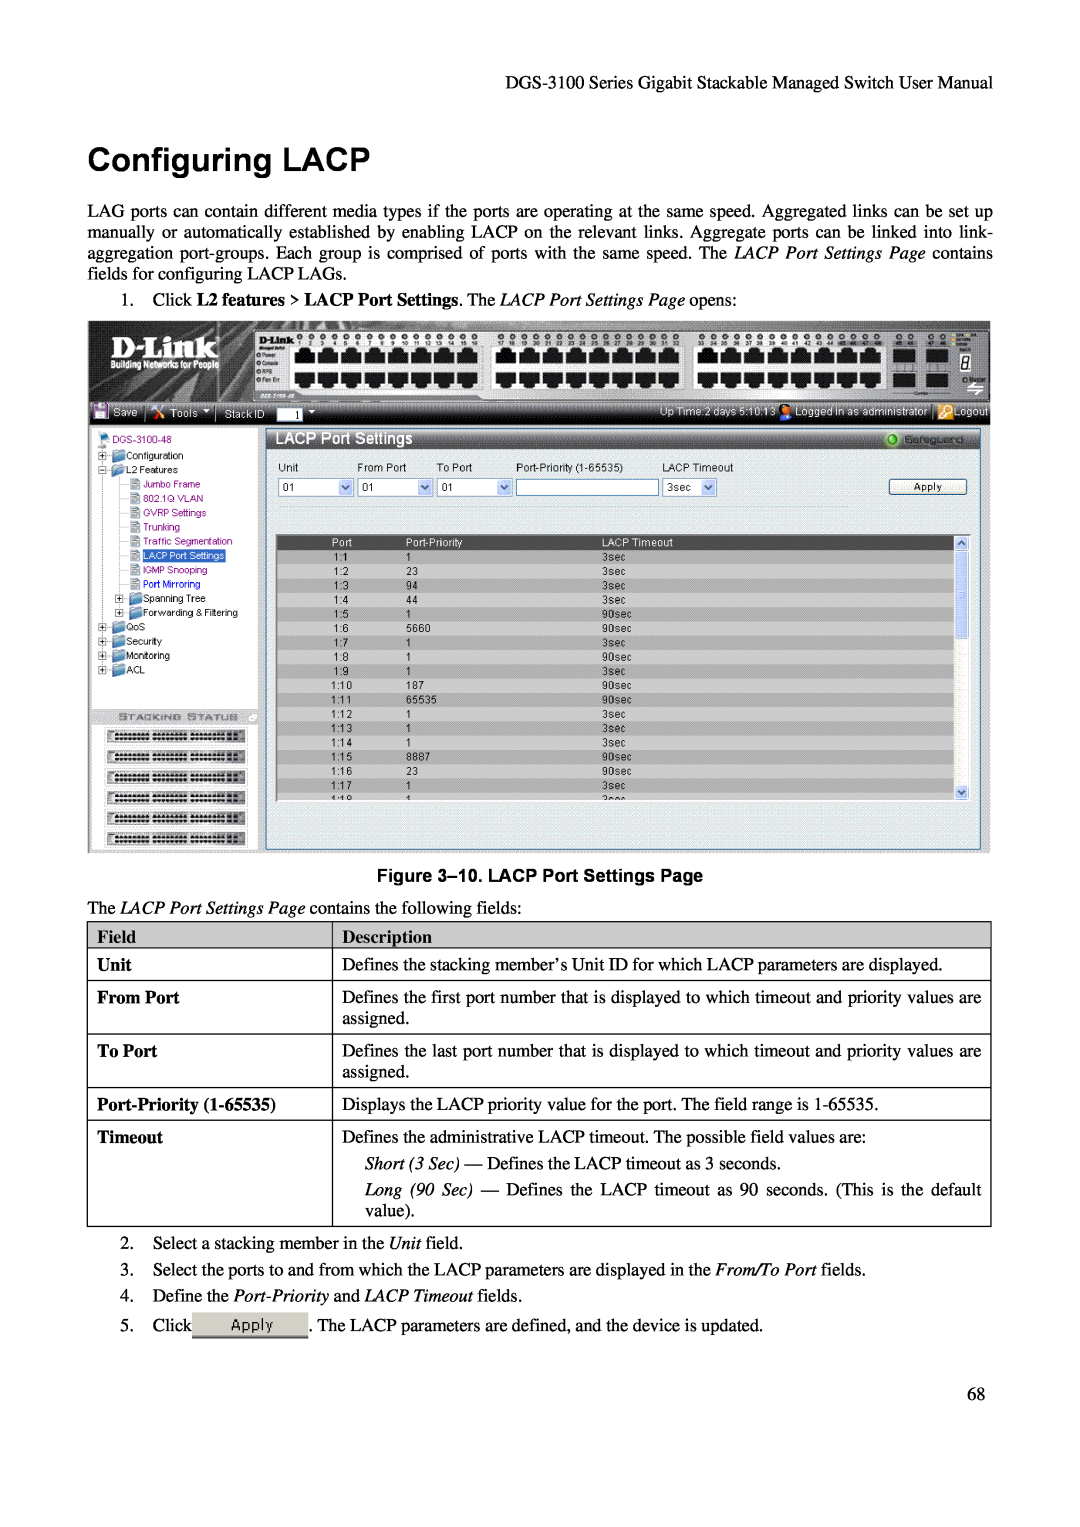 D-Link DGS-3100 Configuring LACP, 10. LACP Port Settings Page, Field, Description, Unit, From Port, To Port, Port-Priority 